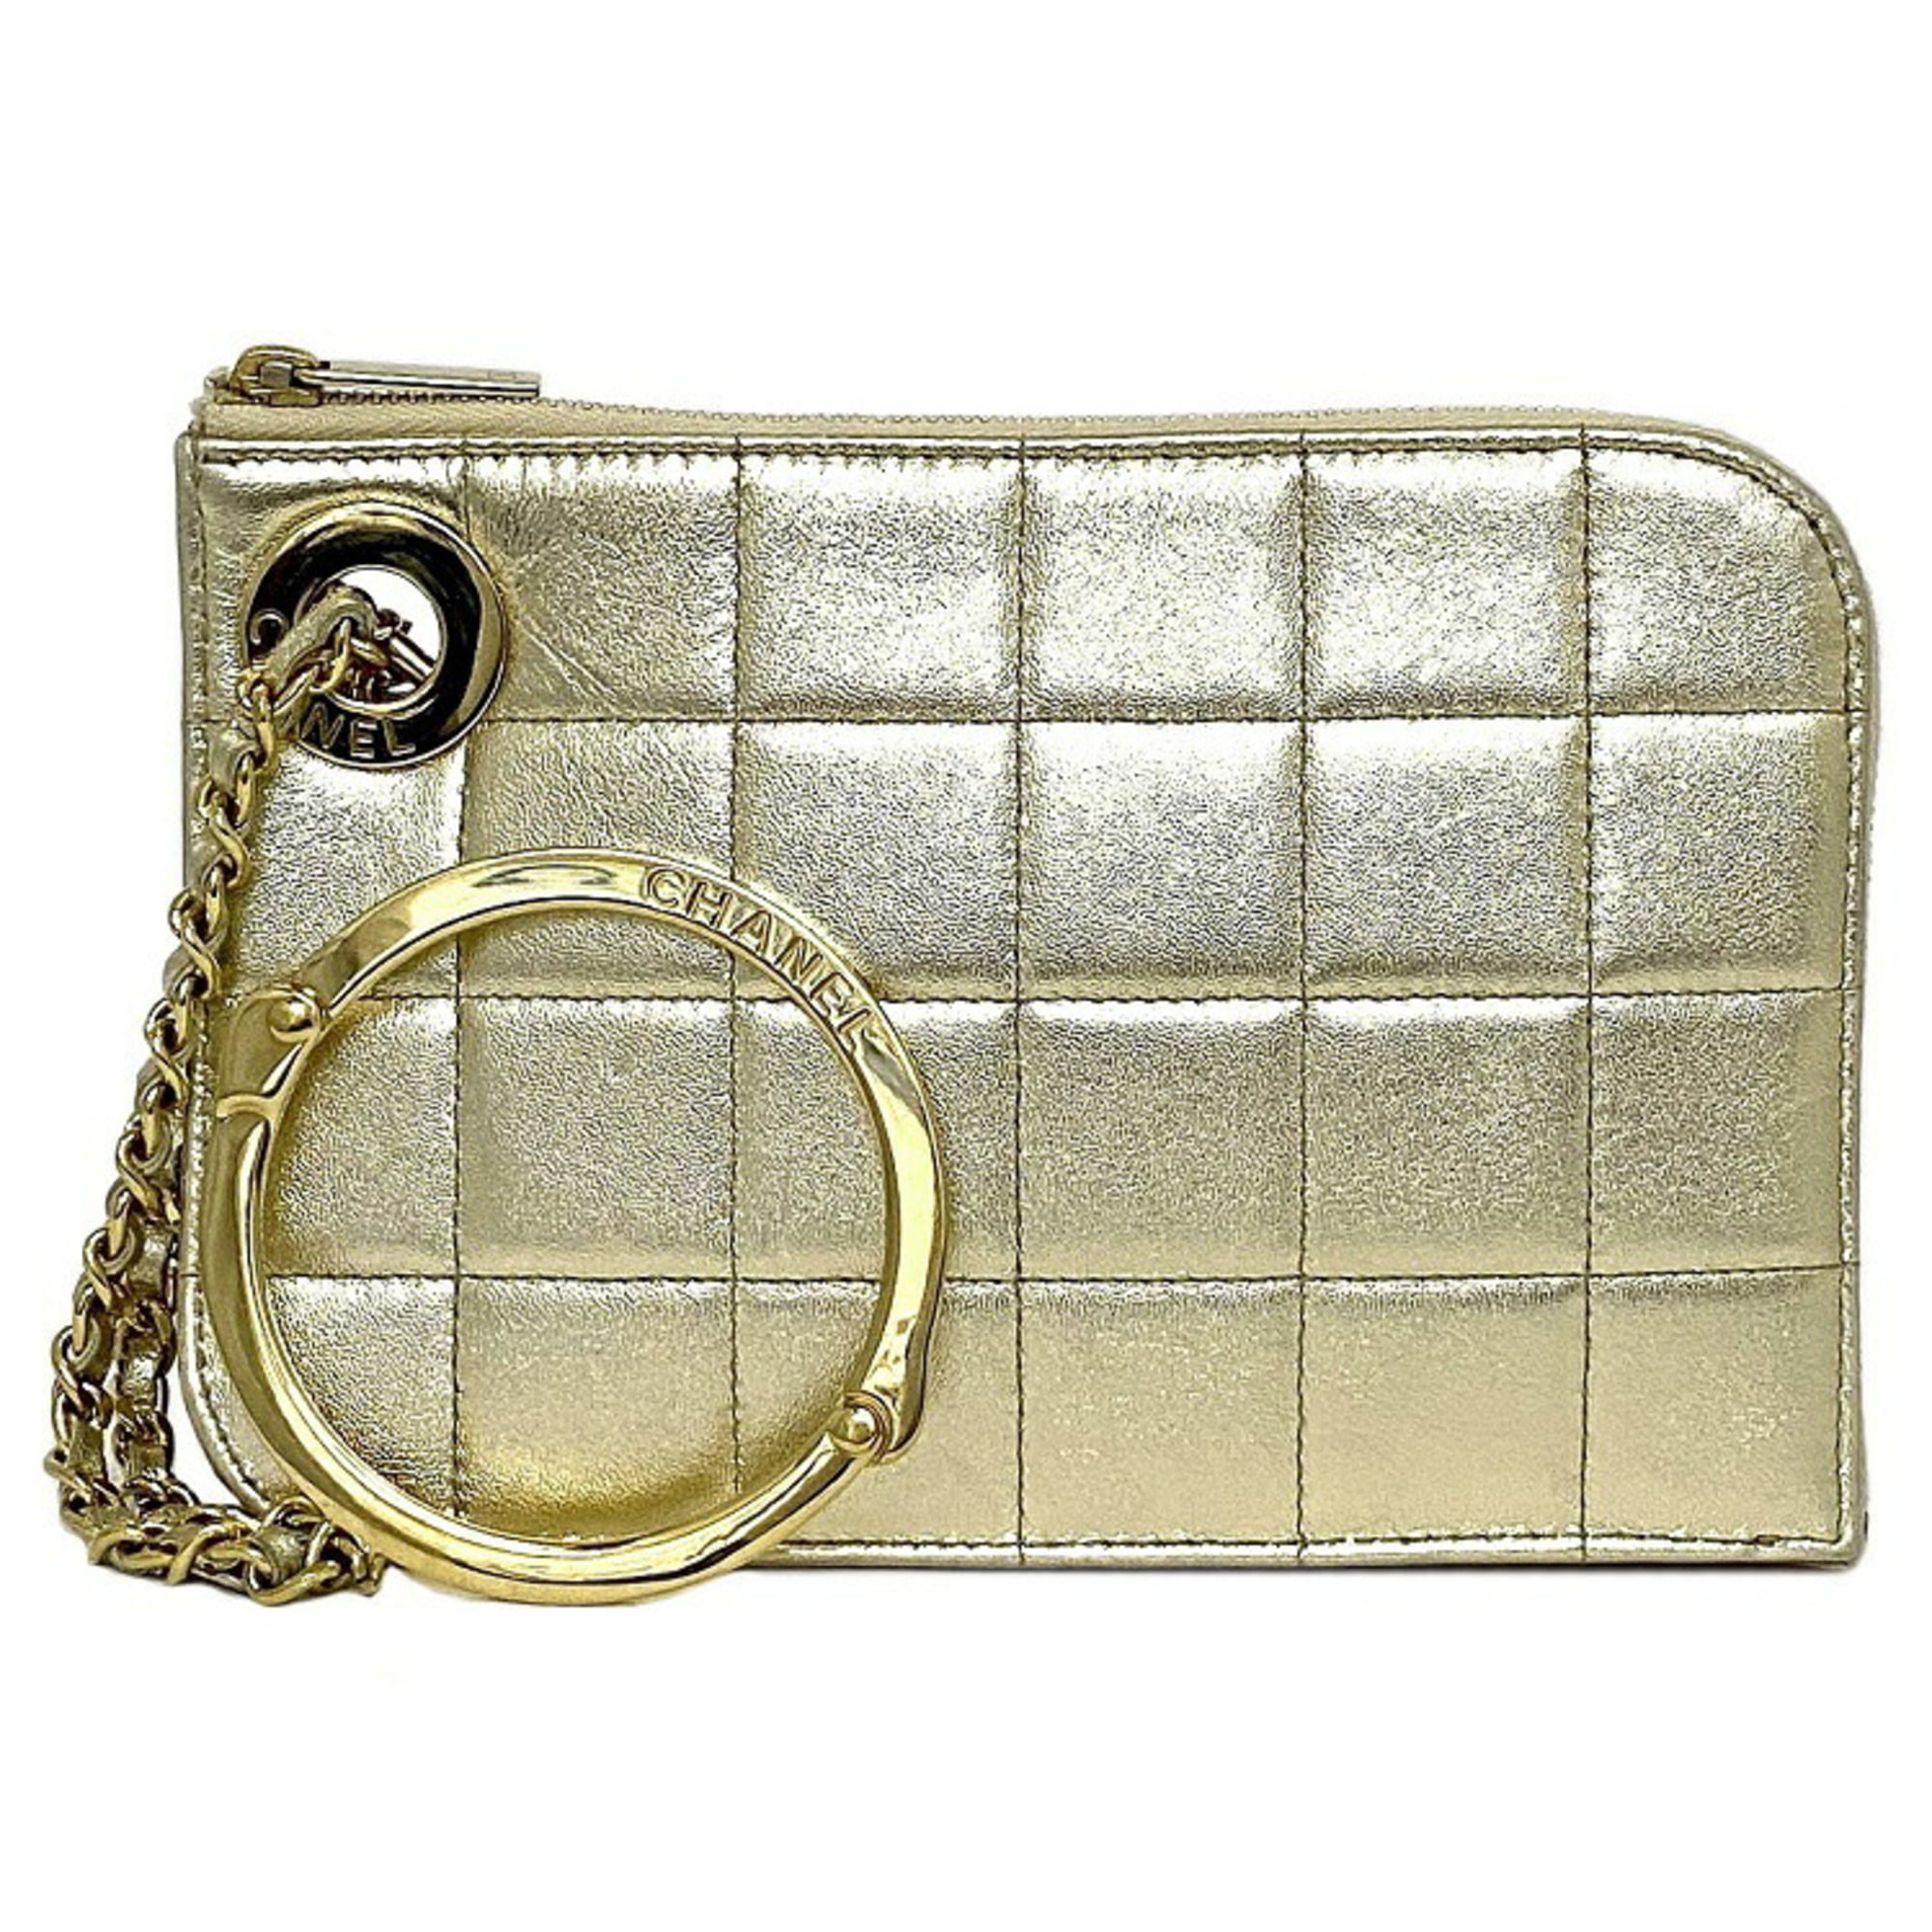 Authenticated Used Chanel Clutch Bag Gold Chocolate Bar Leather Lambskin  7th CHANEL Handbag Chain Quilted Ring Women's Lattice 